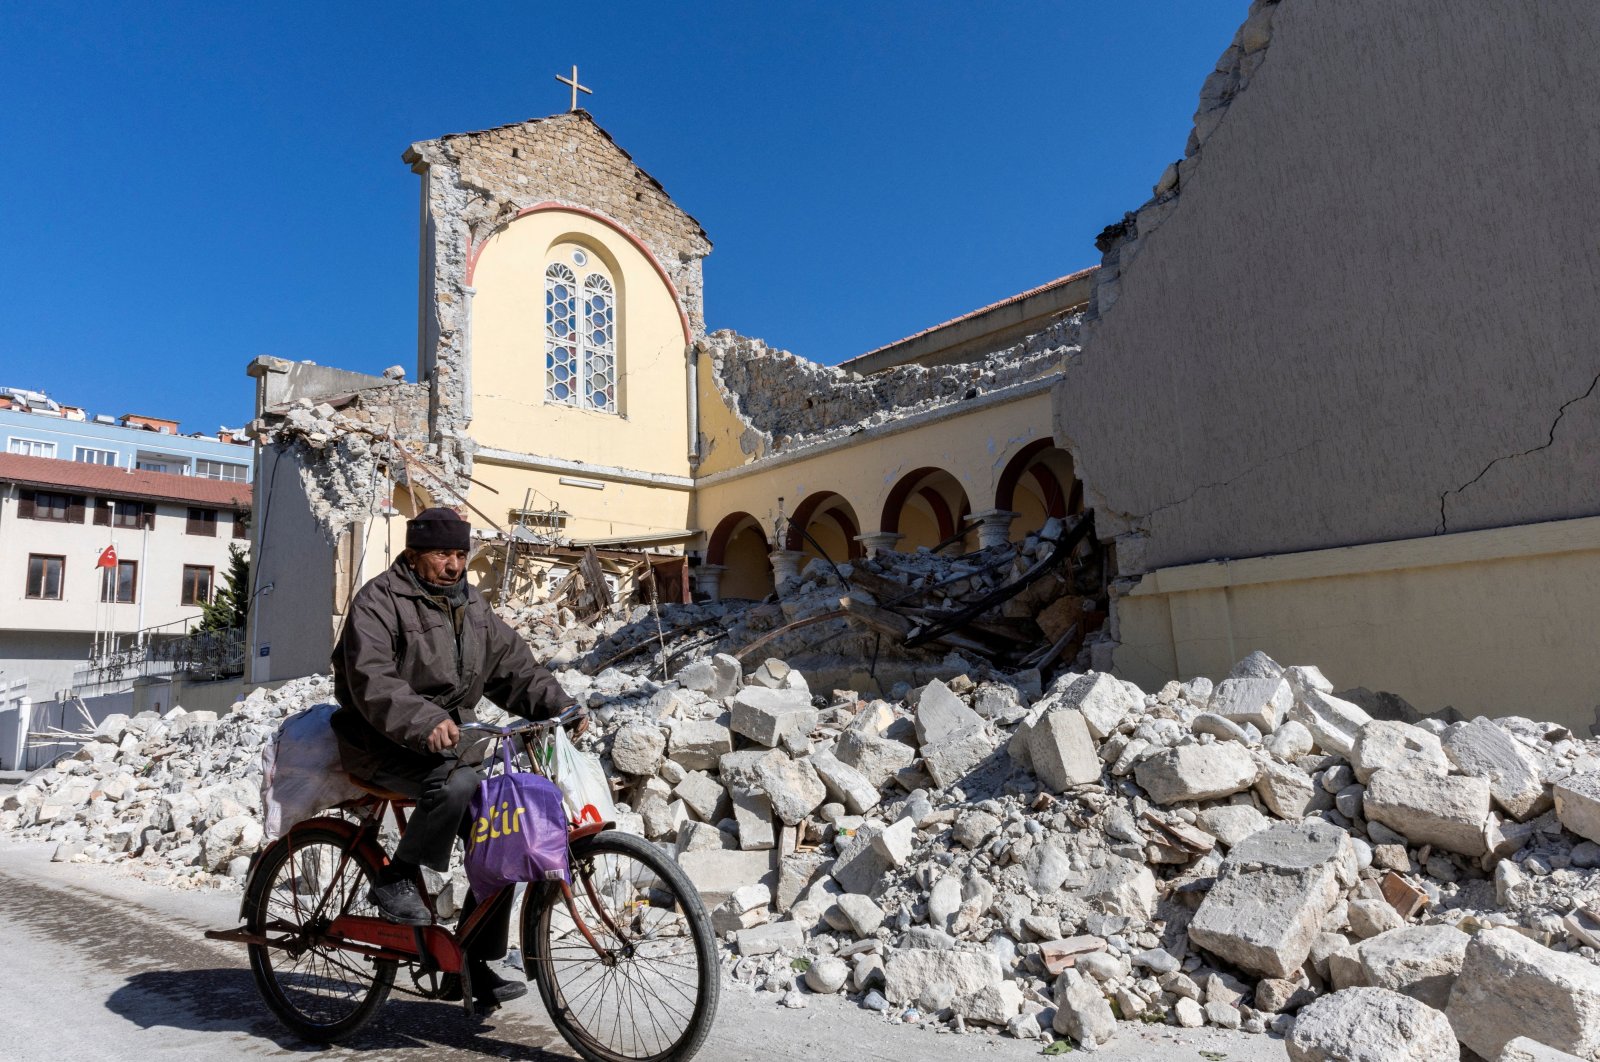 A man rides his bike past a collapsed Roman Catholic church in the aftermath of the deadly earthquake in Iskenderun, a coastal town of Hatay province, Türkiye, Feb. 14, 2023. (Reuters photo)